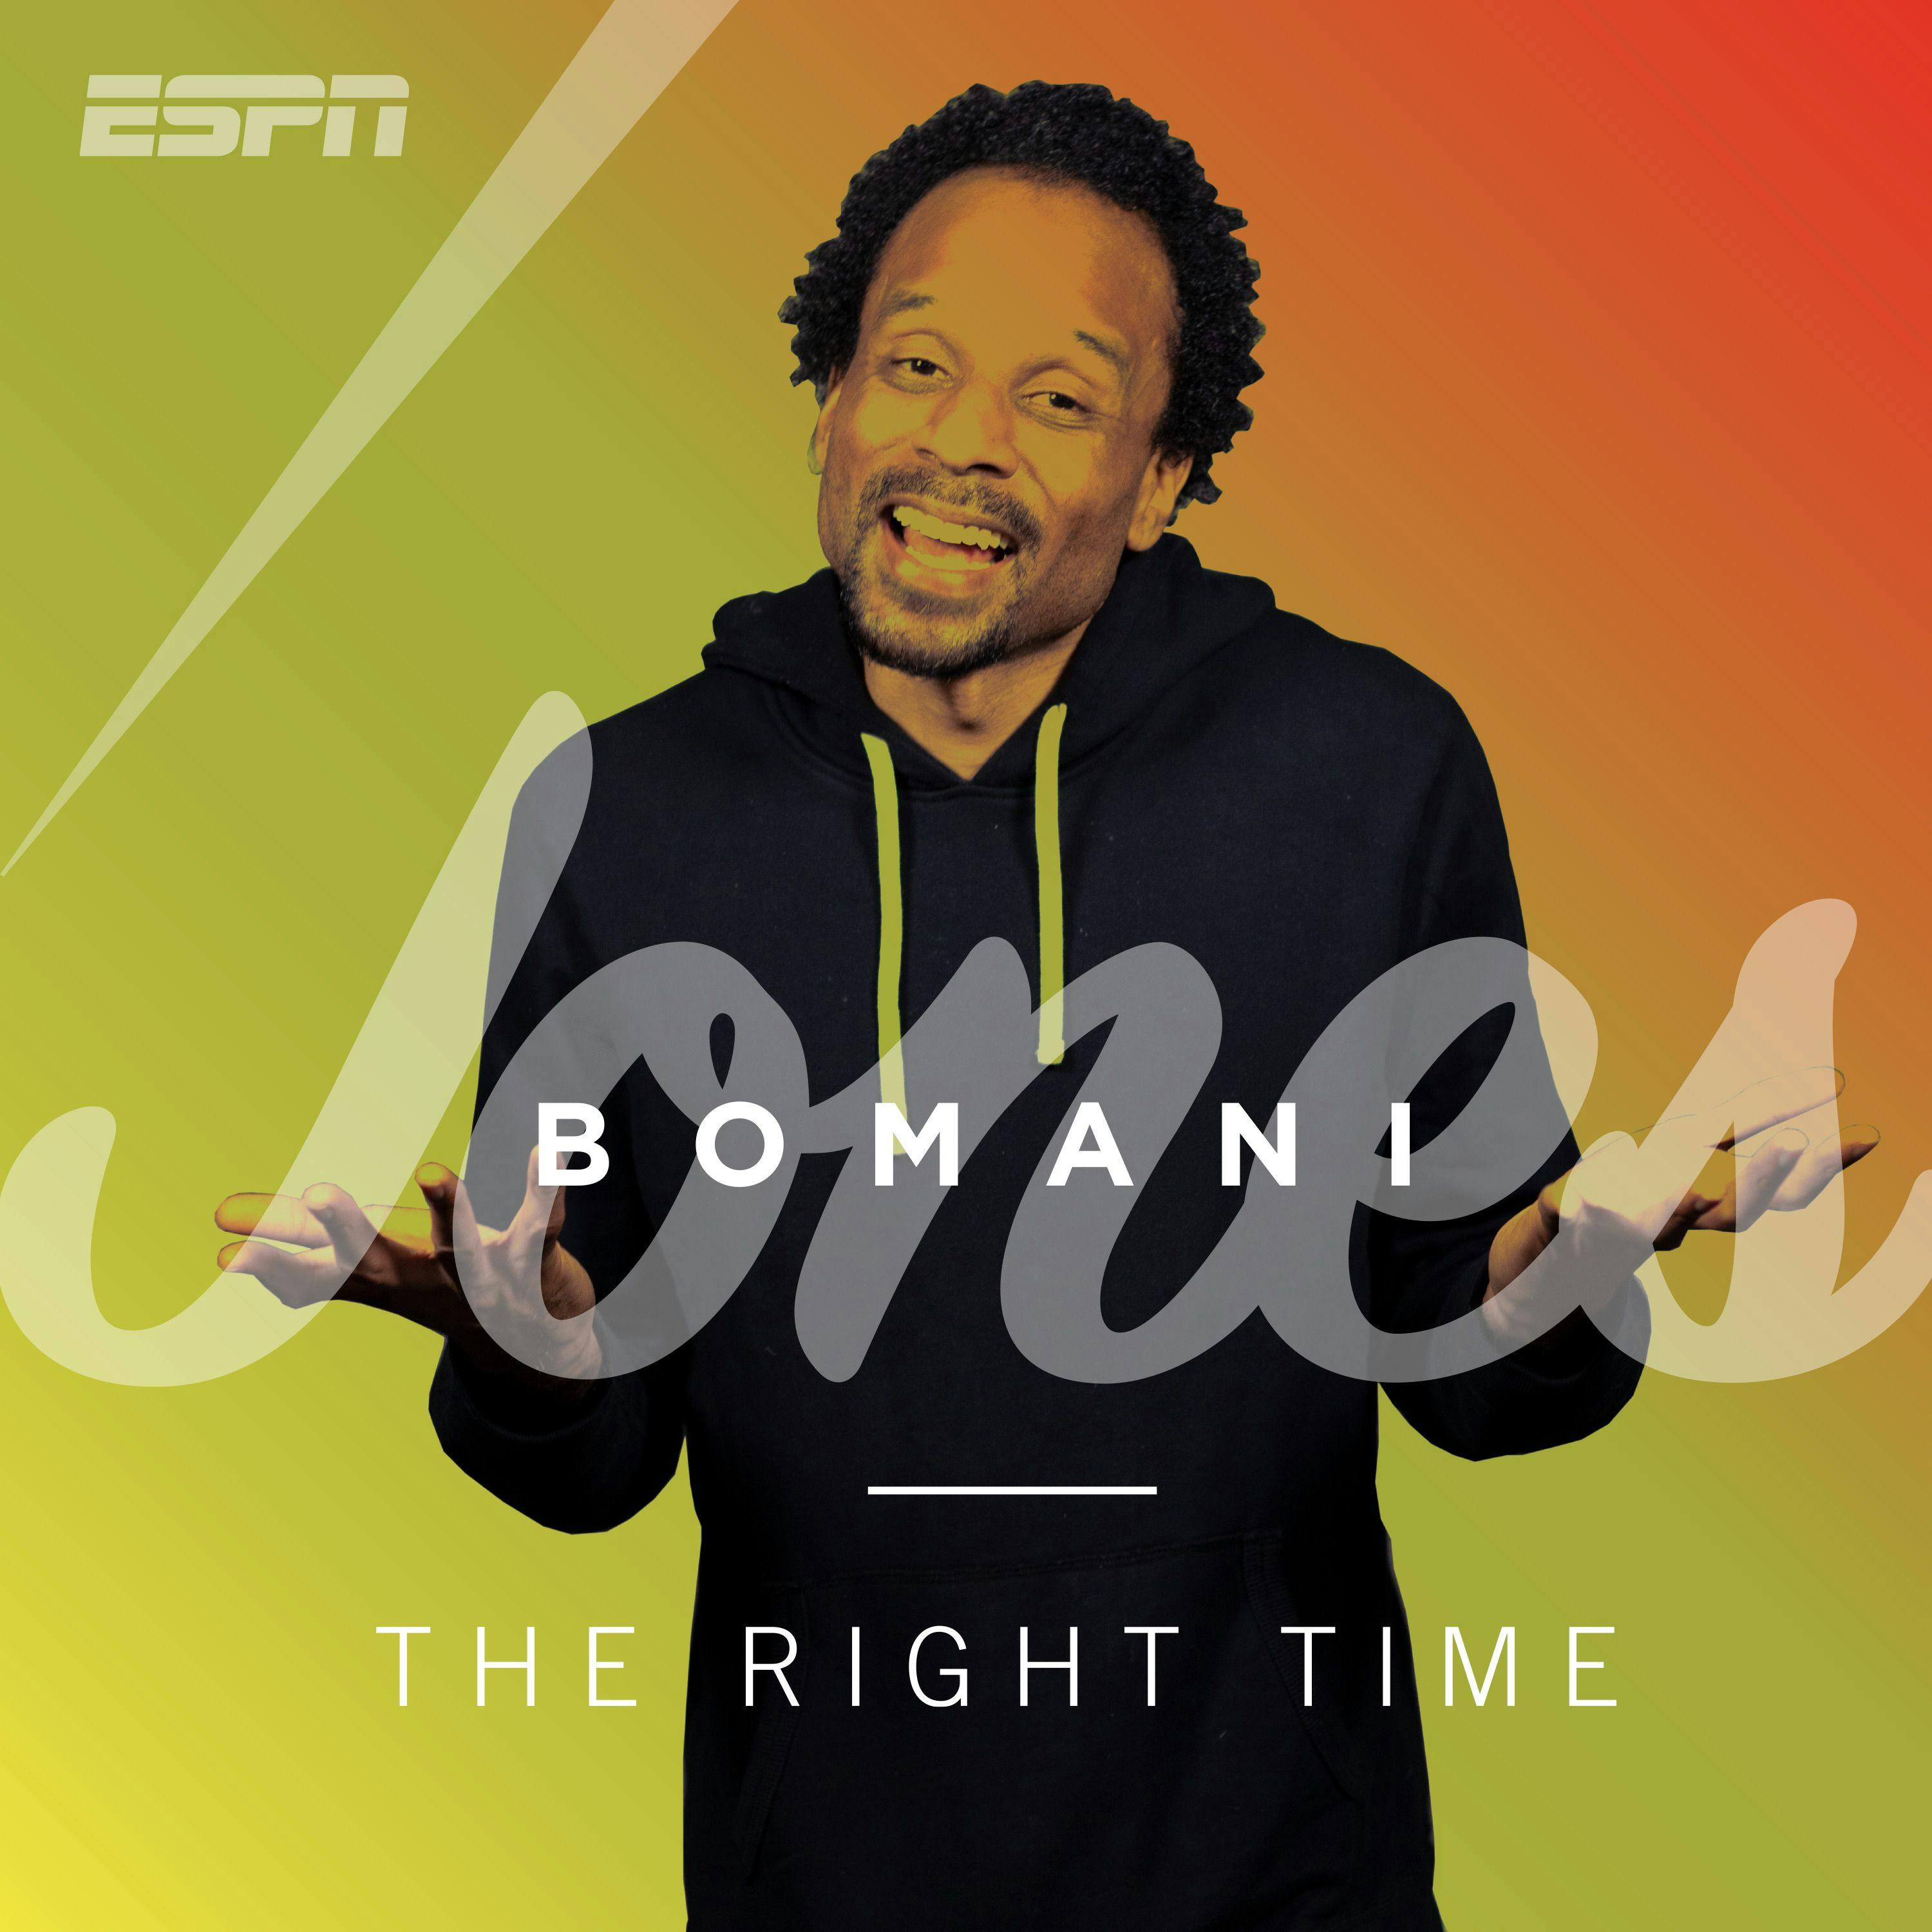 Seel Pank Sexi Video 26 Year Dunlod - The Right Time with Bomani Jones Show - PodCenter - ESPN Radio